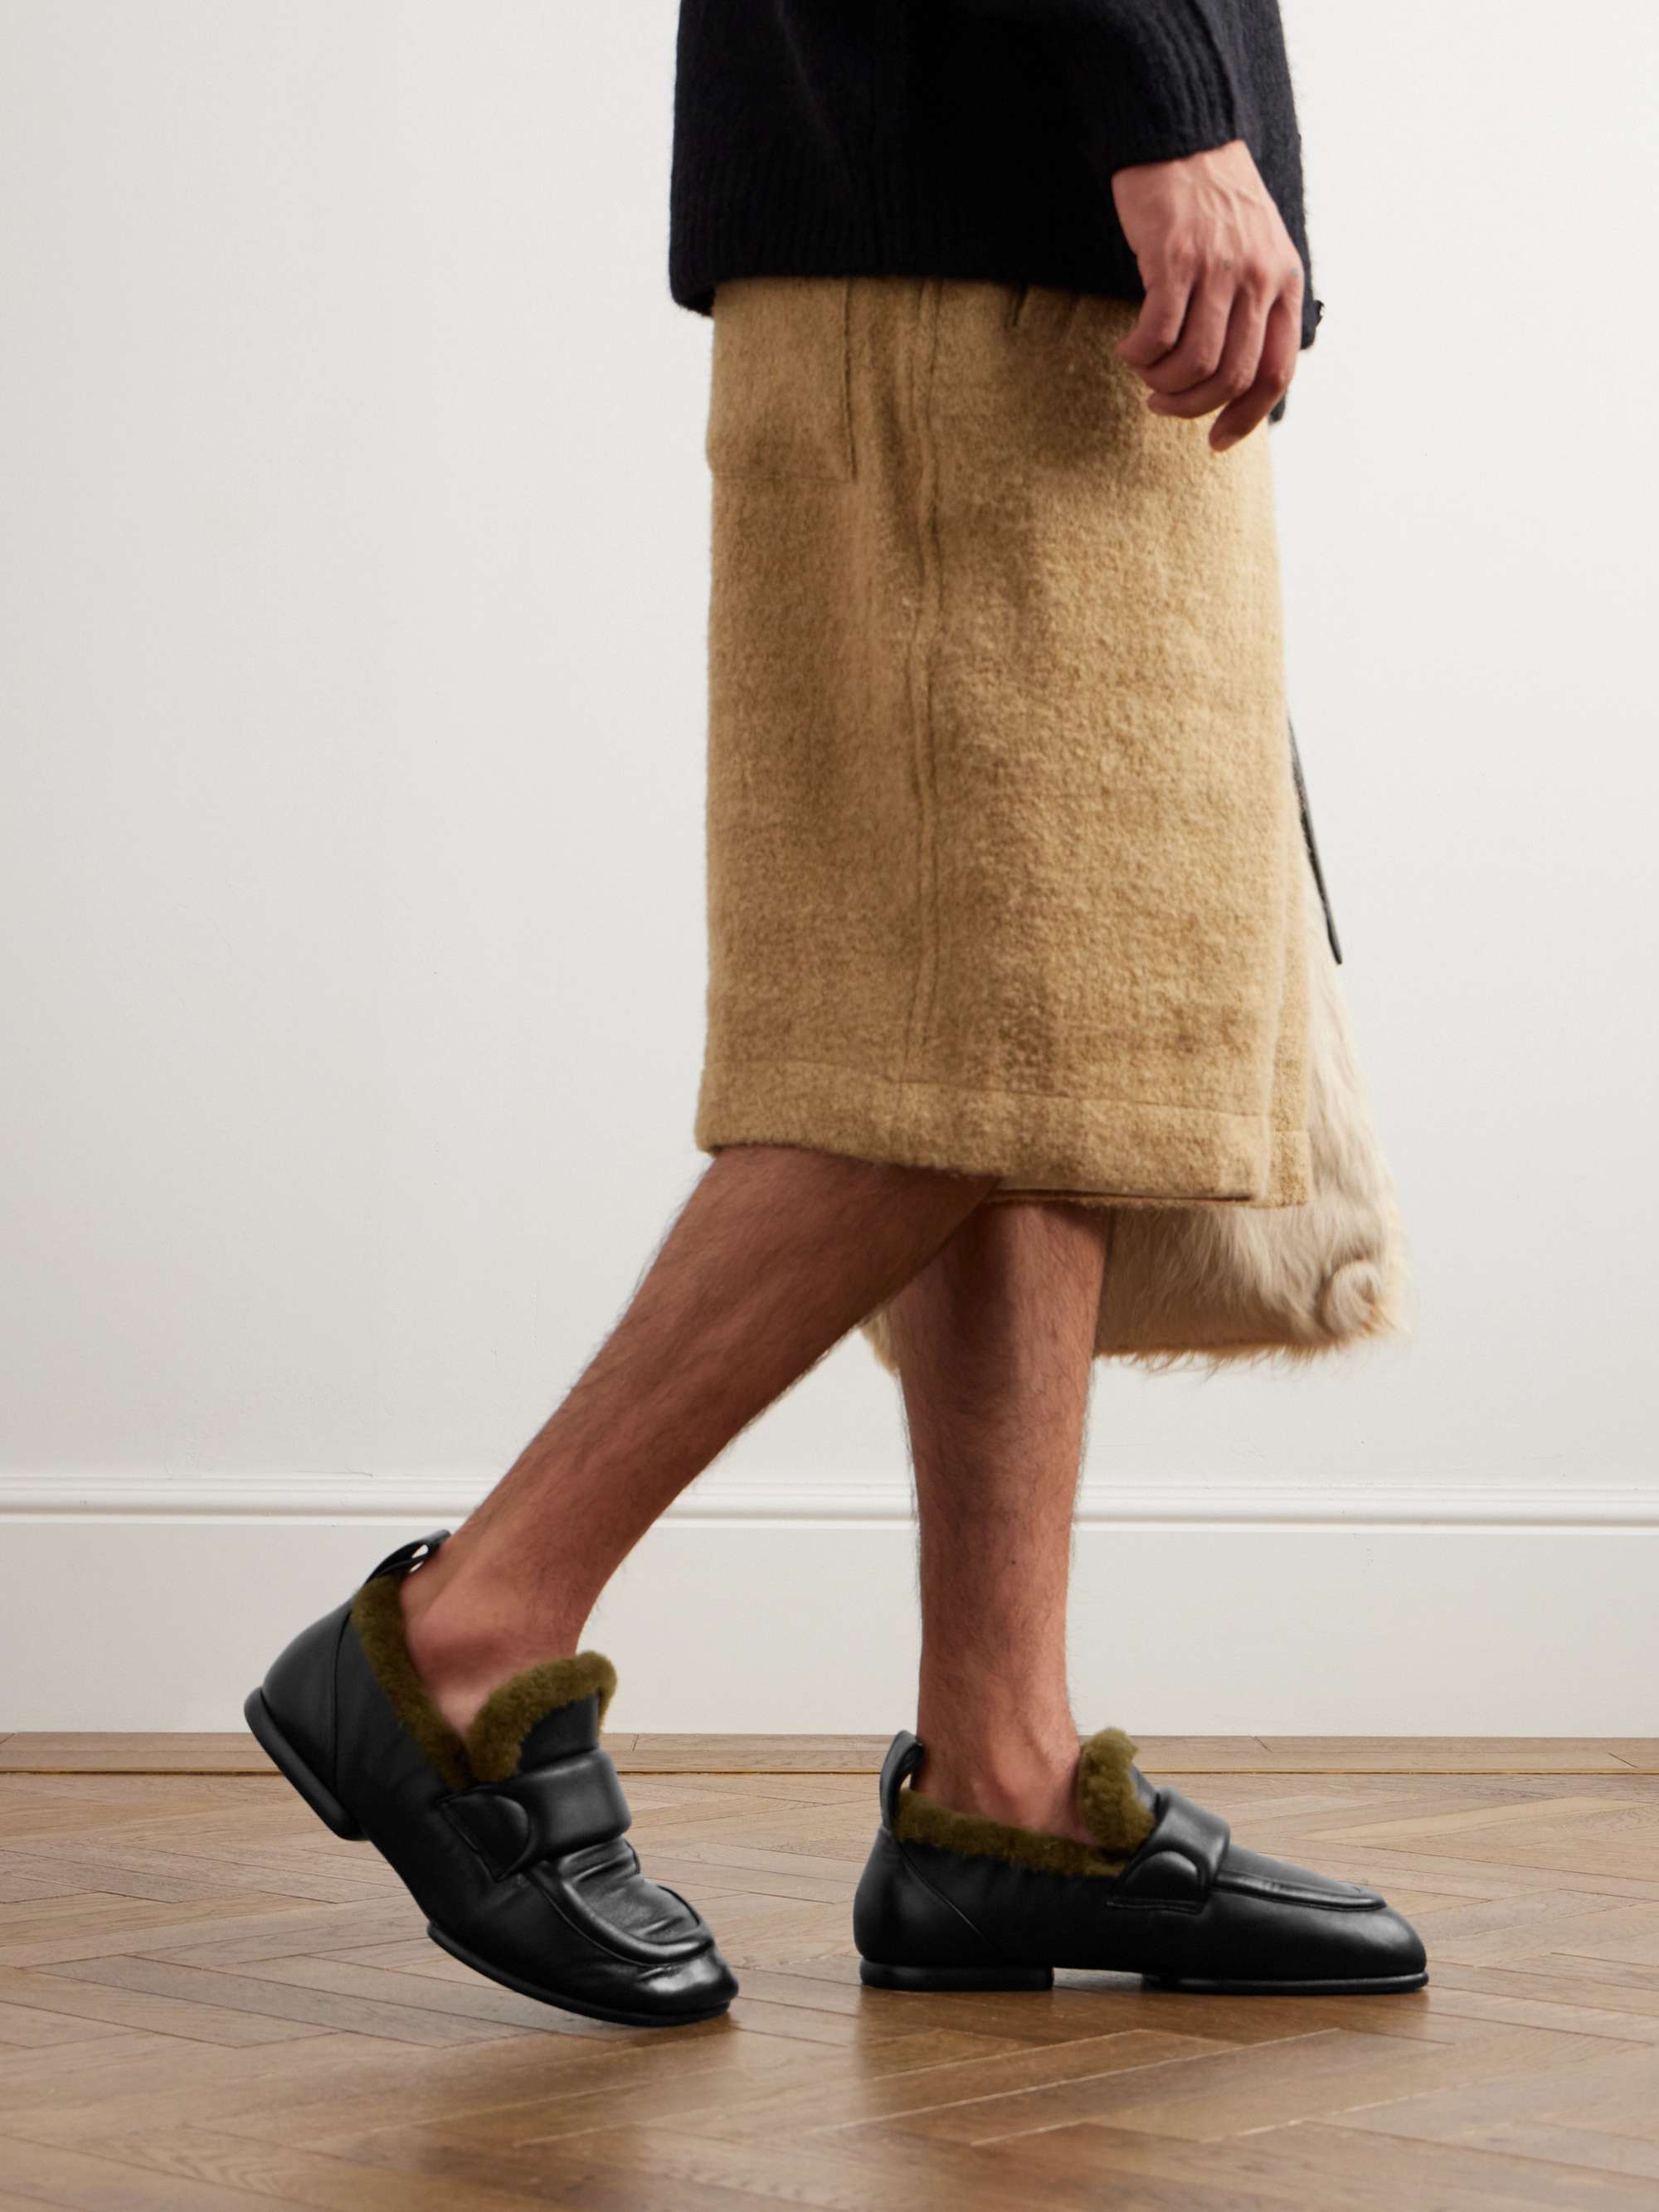 DRIES VAN NOTEN Shearling-Lined Leather Loafers for Men | MR PORTER